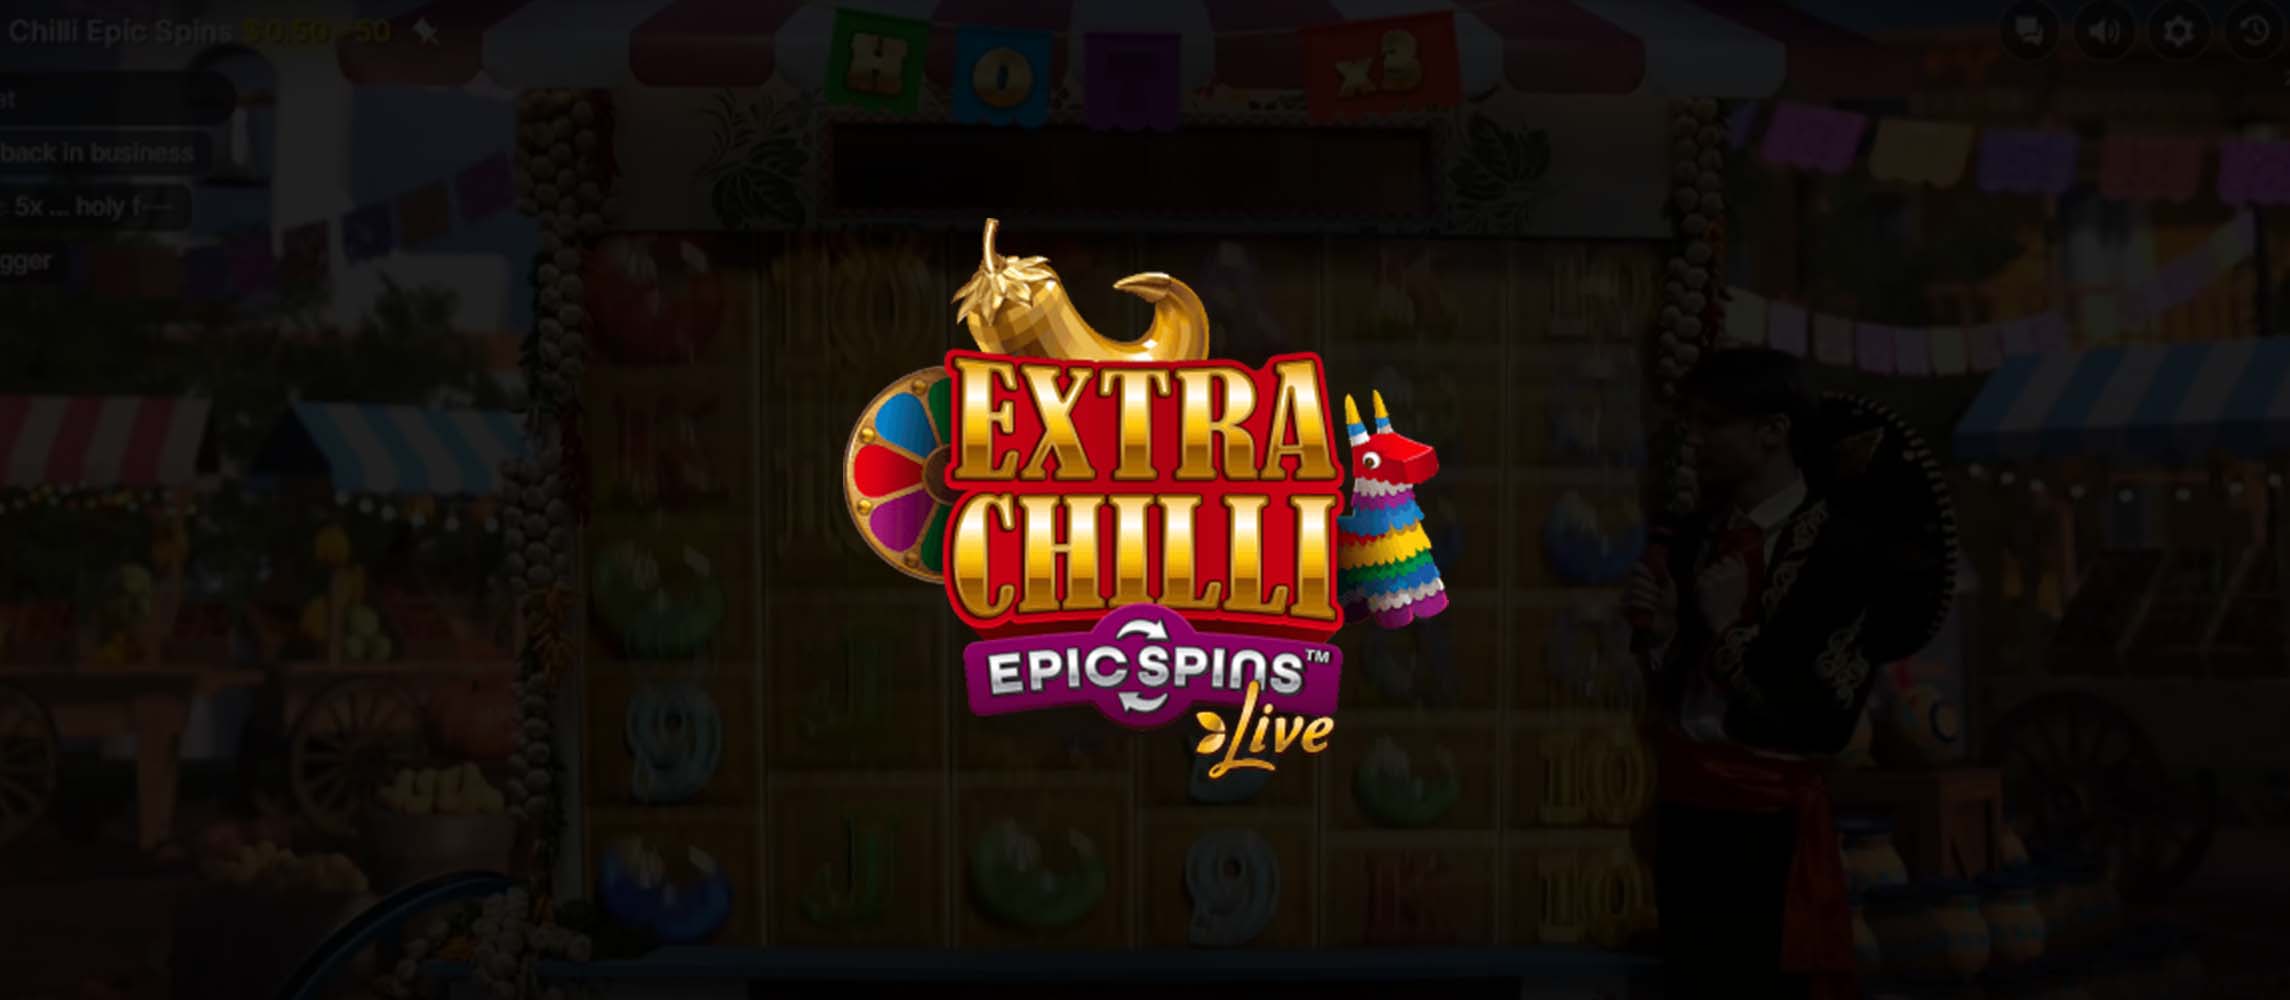 Extra Chilli Epic Spins by Evolution